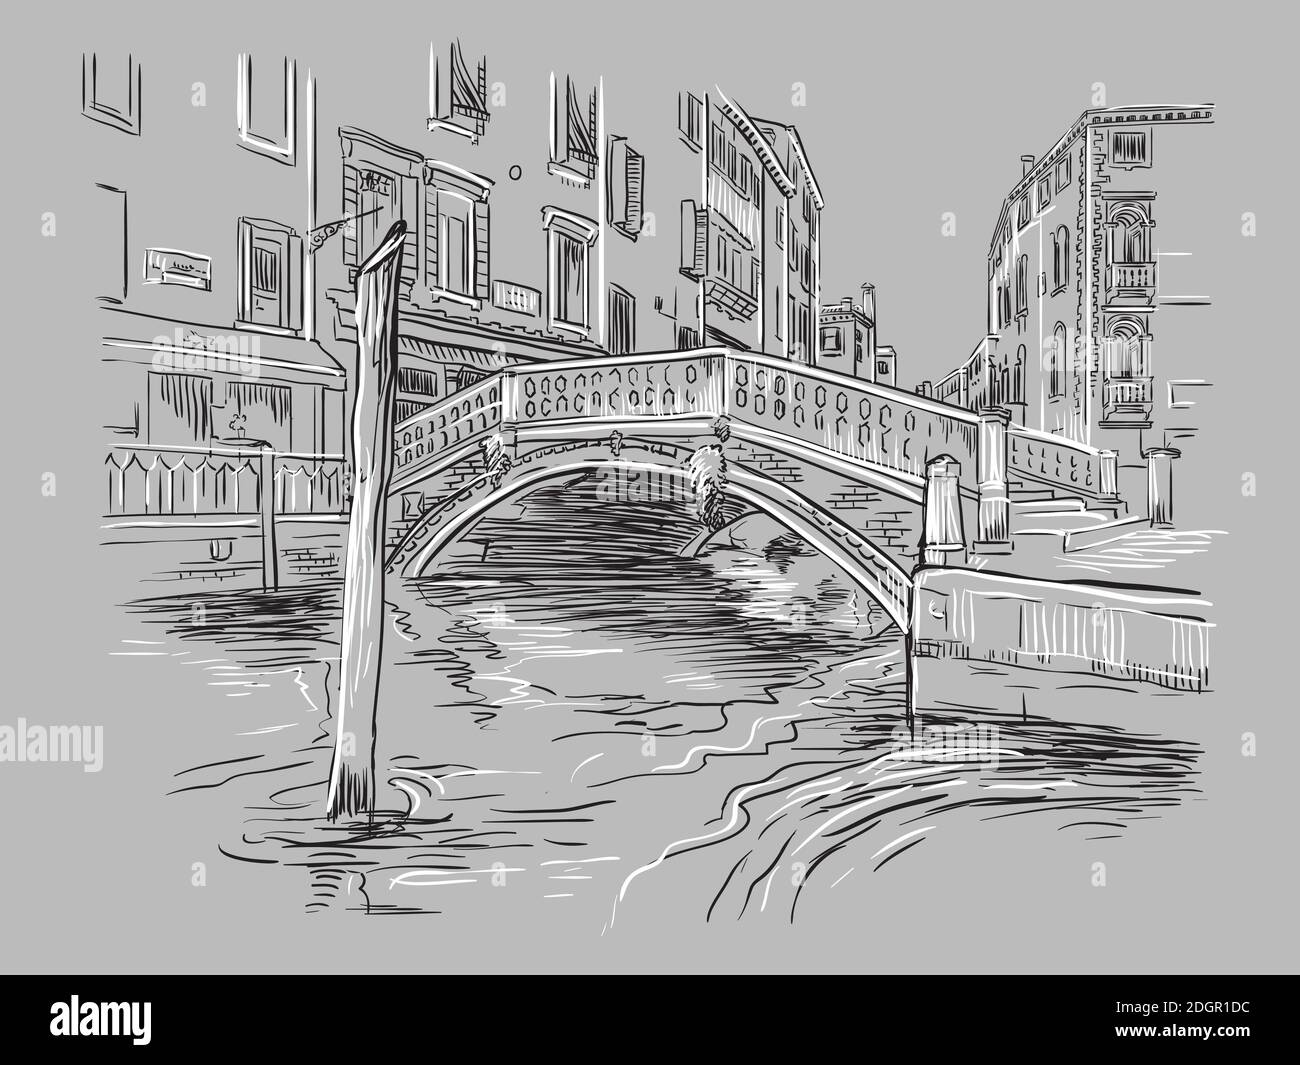 Vector hand drawing illustration of bridge on canal in Venice. Venice cityscape hand drawn sketch in monochrome colors isolated on gray background. Tr Stock Vector